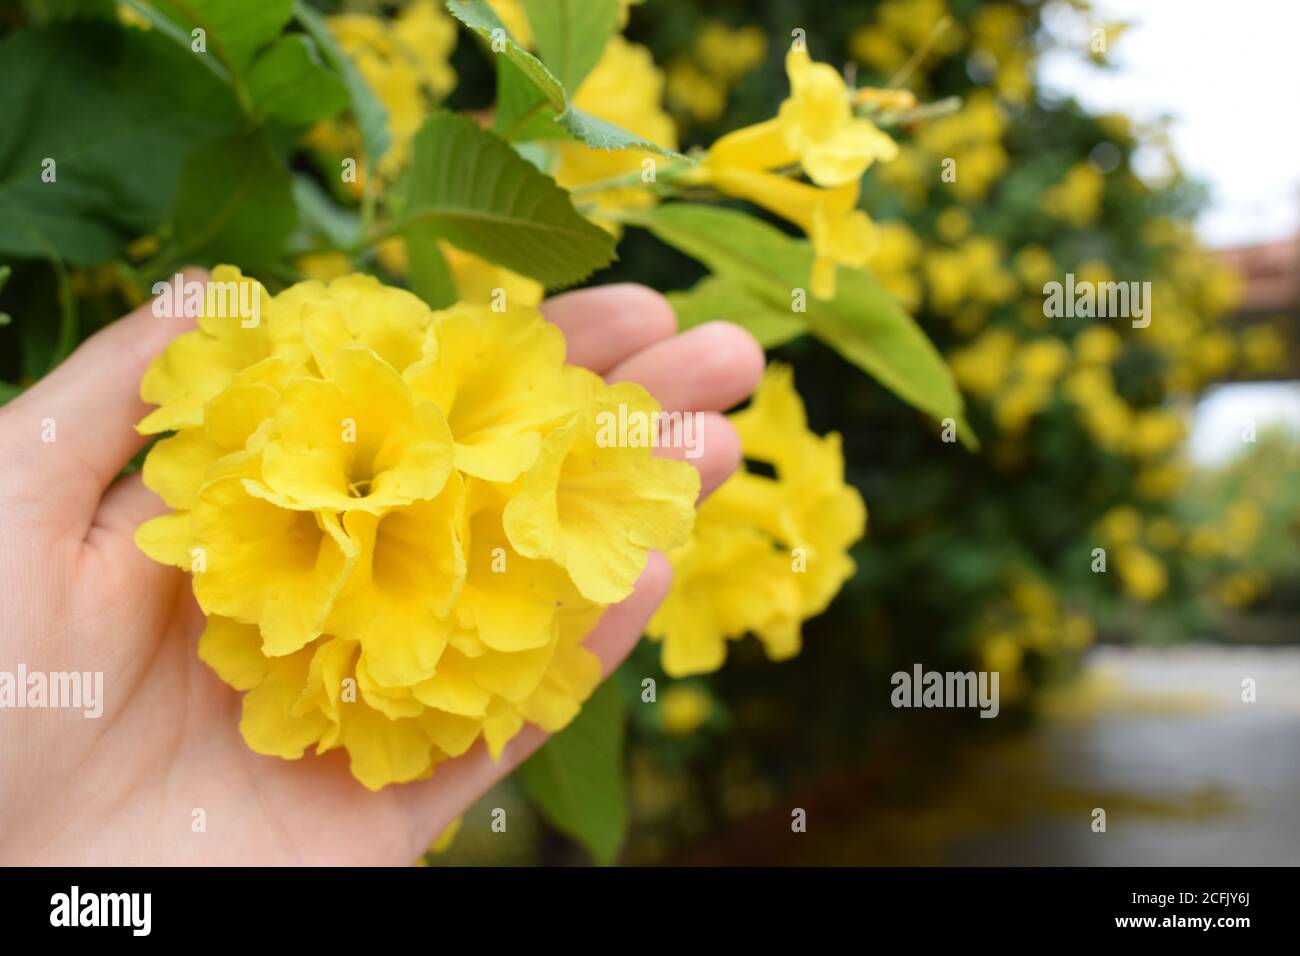 Yellow flowers of the tekoma tree in hand against the background of a blooming garden Stock Photo